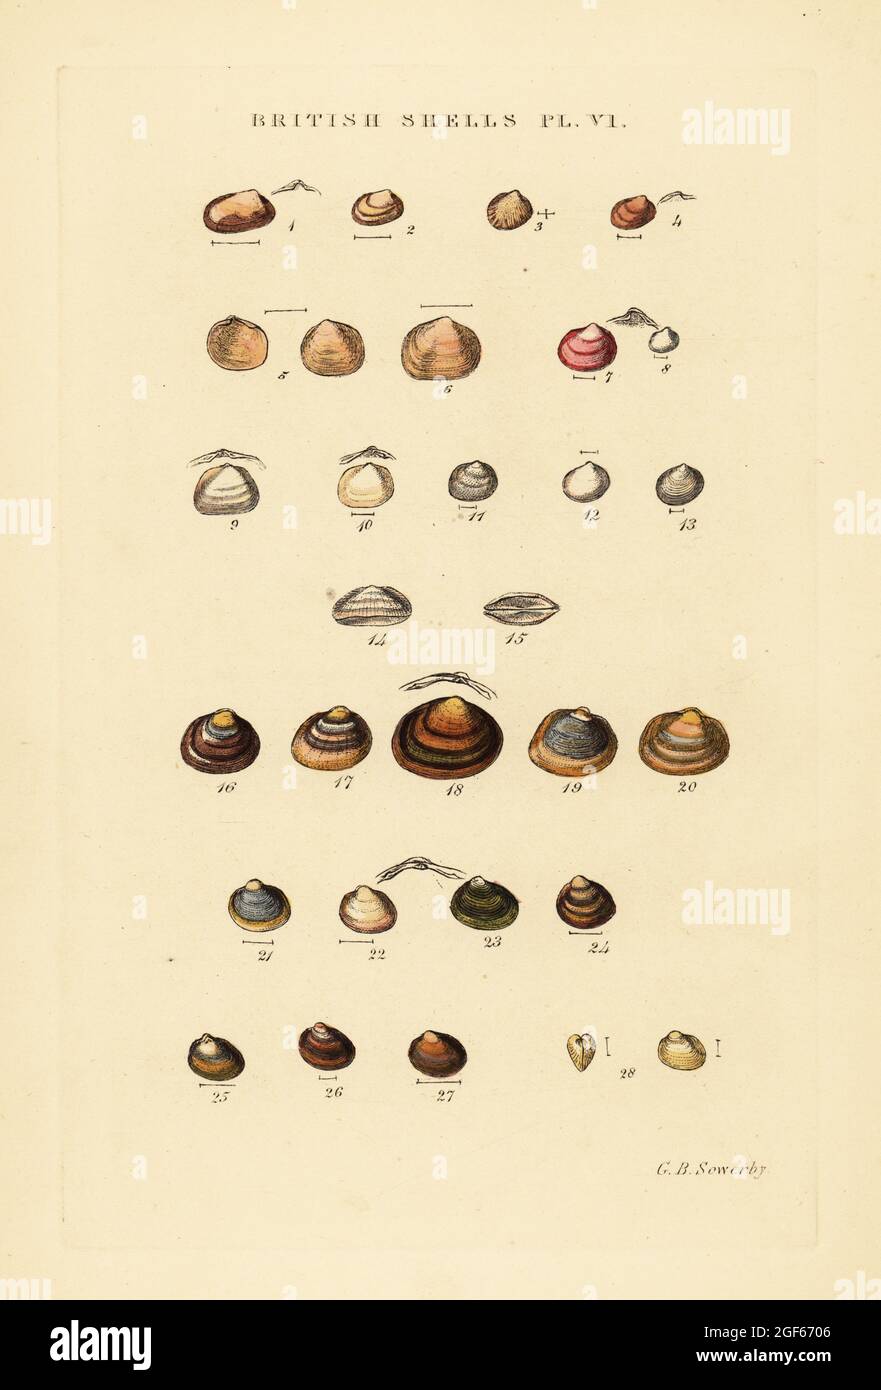 Marine bivalves, Kelliadae, and freshwater shells, Cycladidae. Handcoloured copperplate engraving by George Brettingham Sowerby from his own Illustrated Index of British Shells, Sowerby and Simpkin, Marshall & Co., London, 1859. George Brettingham Sowerby II (1812-1884), British naturalist, illustrator, and conchologist. Stock Photo